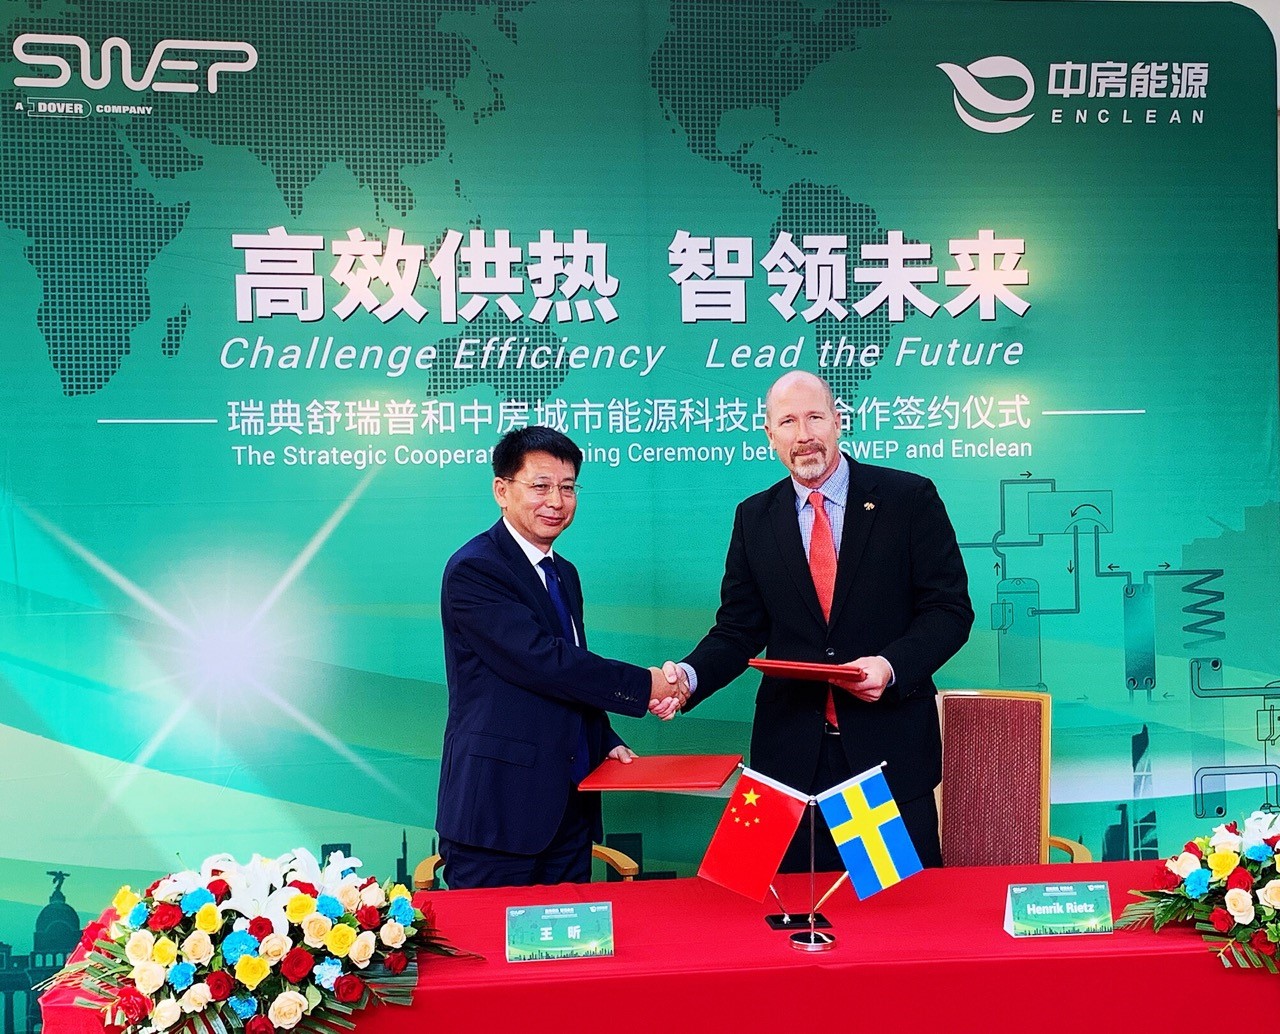 Strategic Cooperation Signing Ceremony between SWEP and Enclean